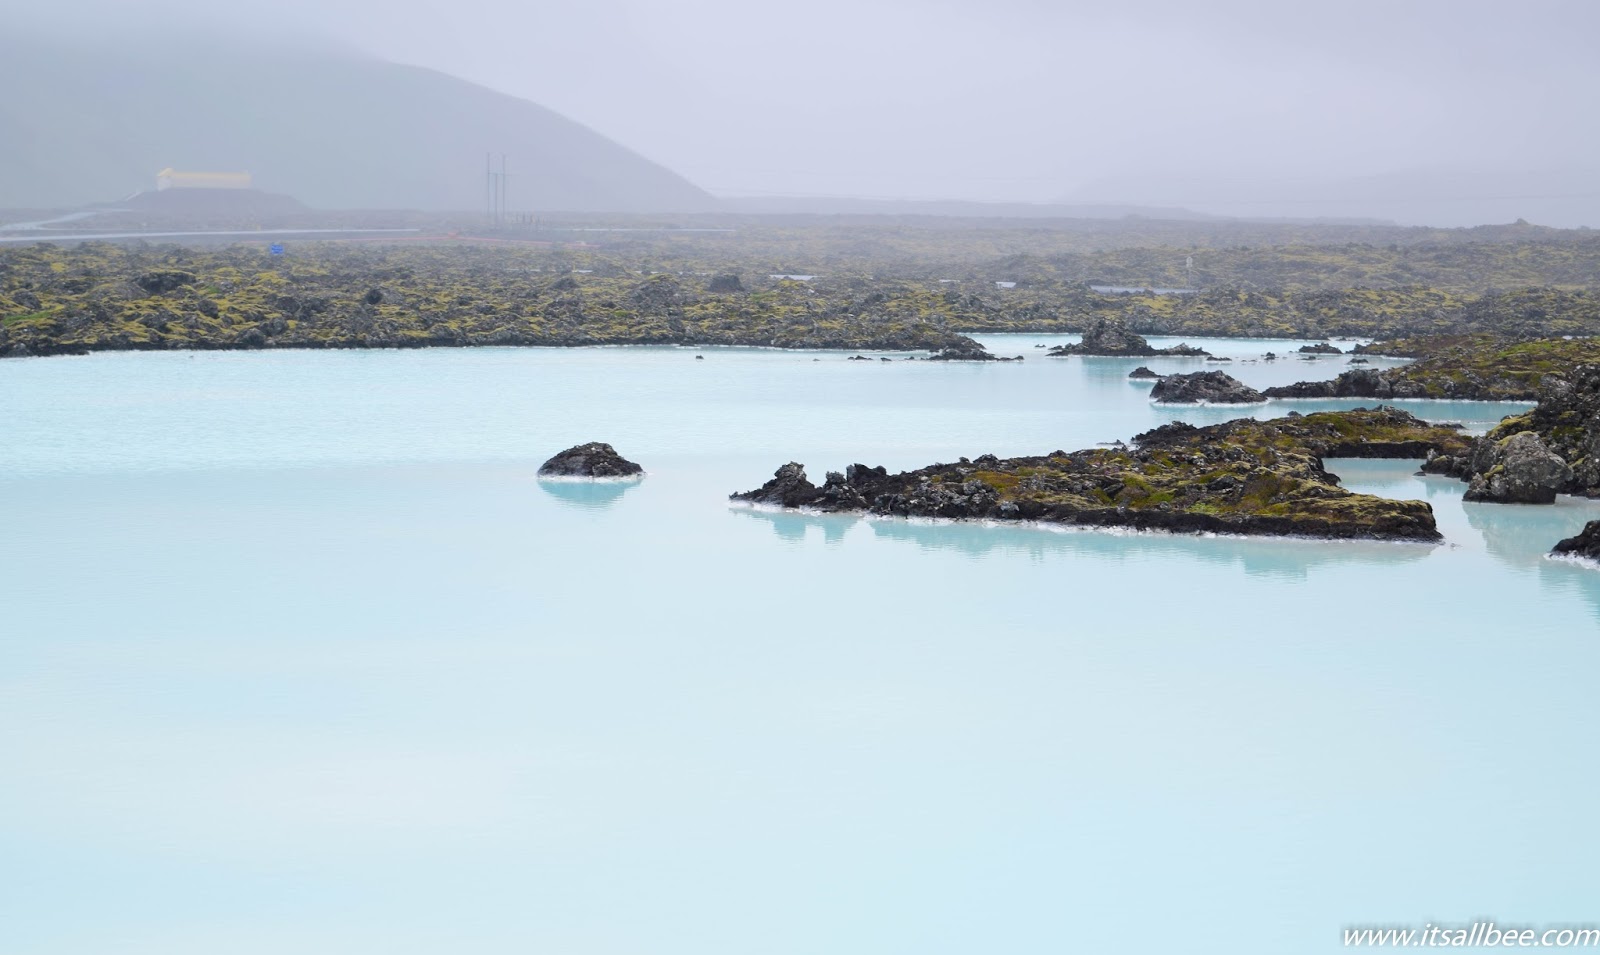 Visiting The Blue Lagoon In Iceland + Tips - Blue Lagoon Location, Admission fee and how to get there! #itsallbee #traveltips #adventure #spas #hotspring